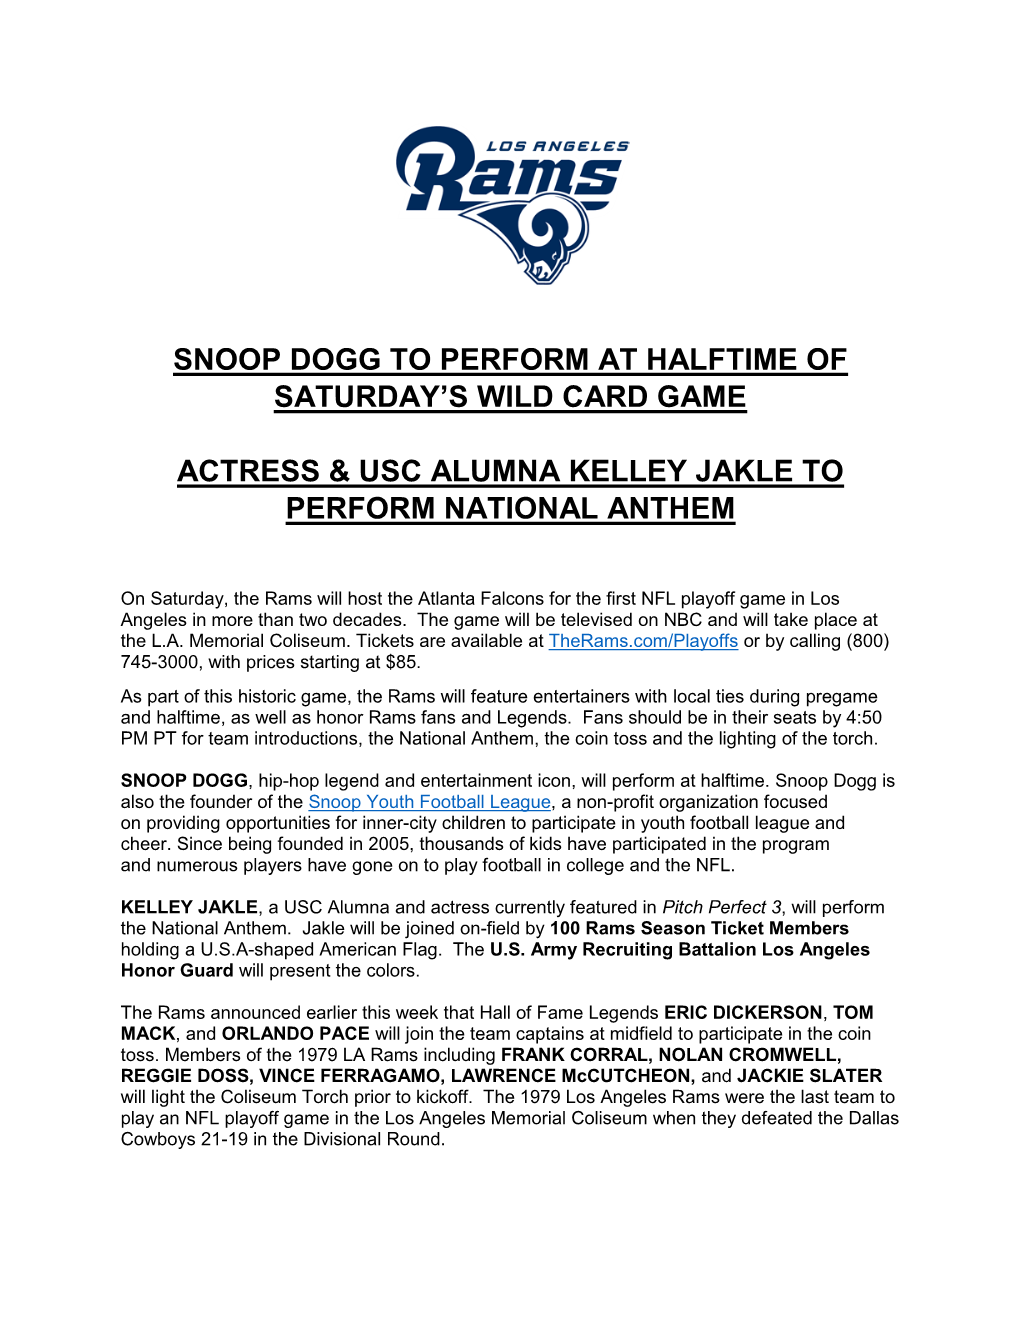 Snoop Dogg to Perform at Halftime of Saturday's